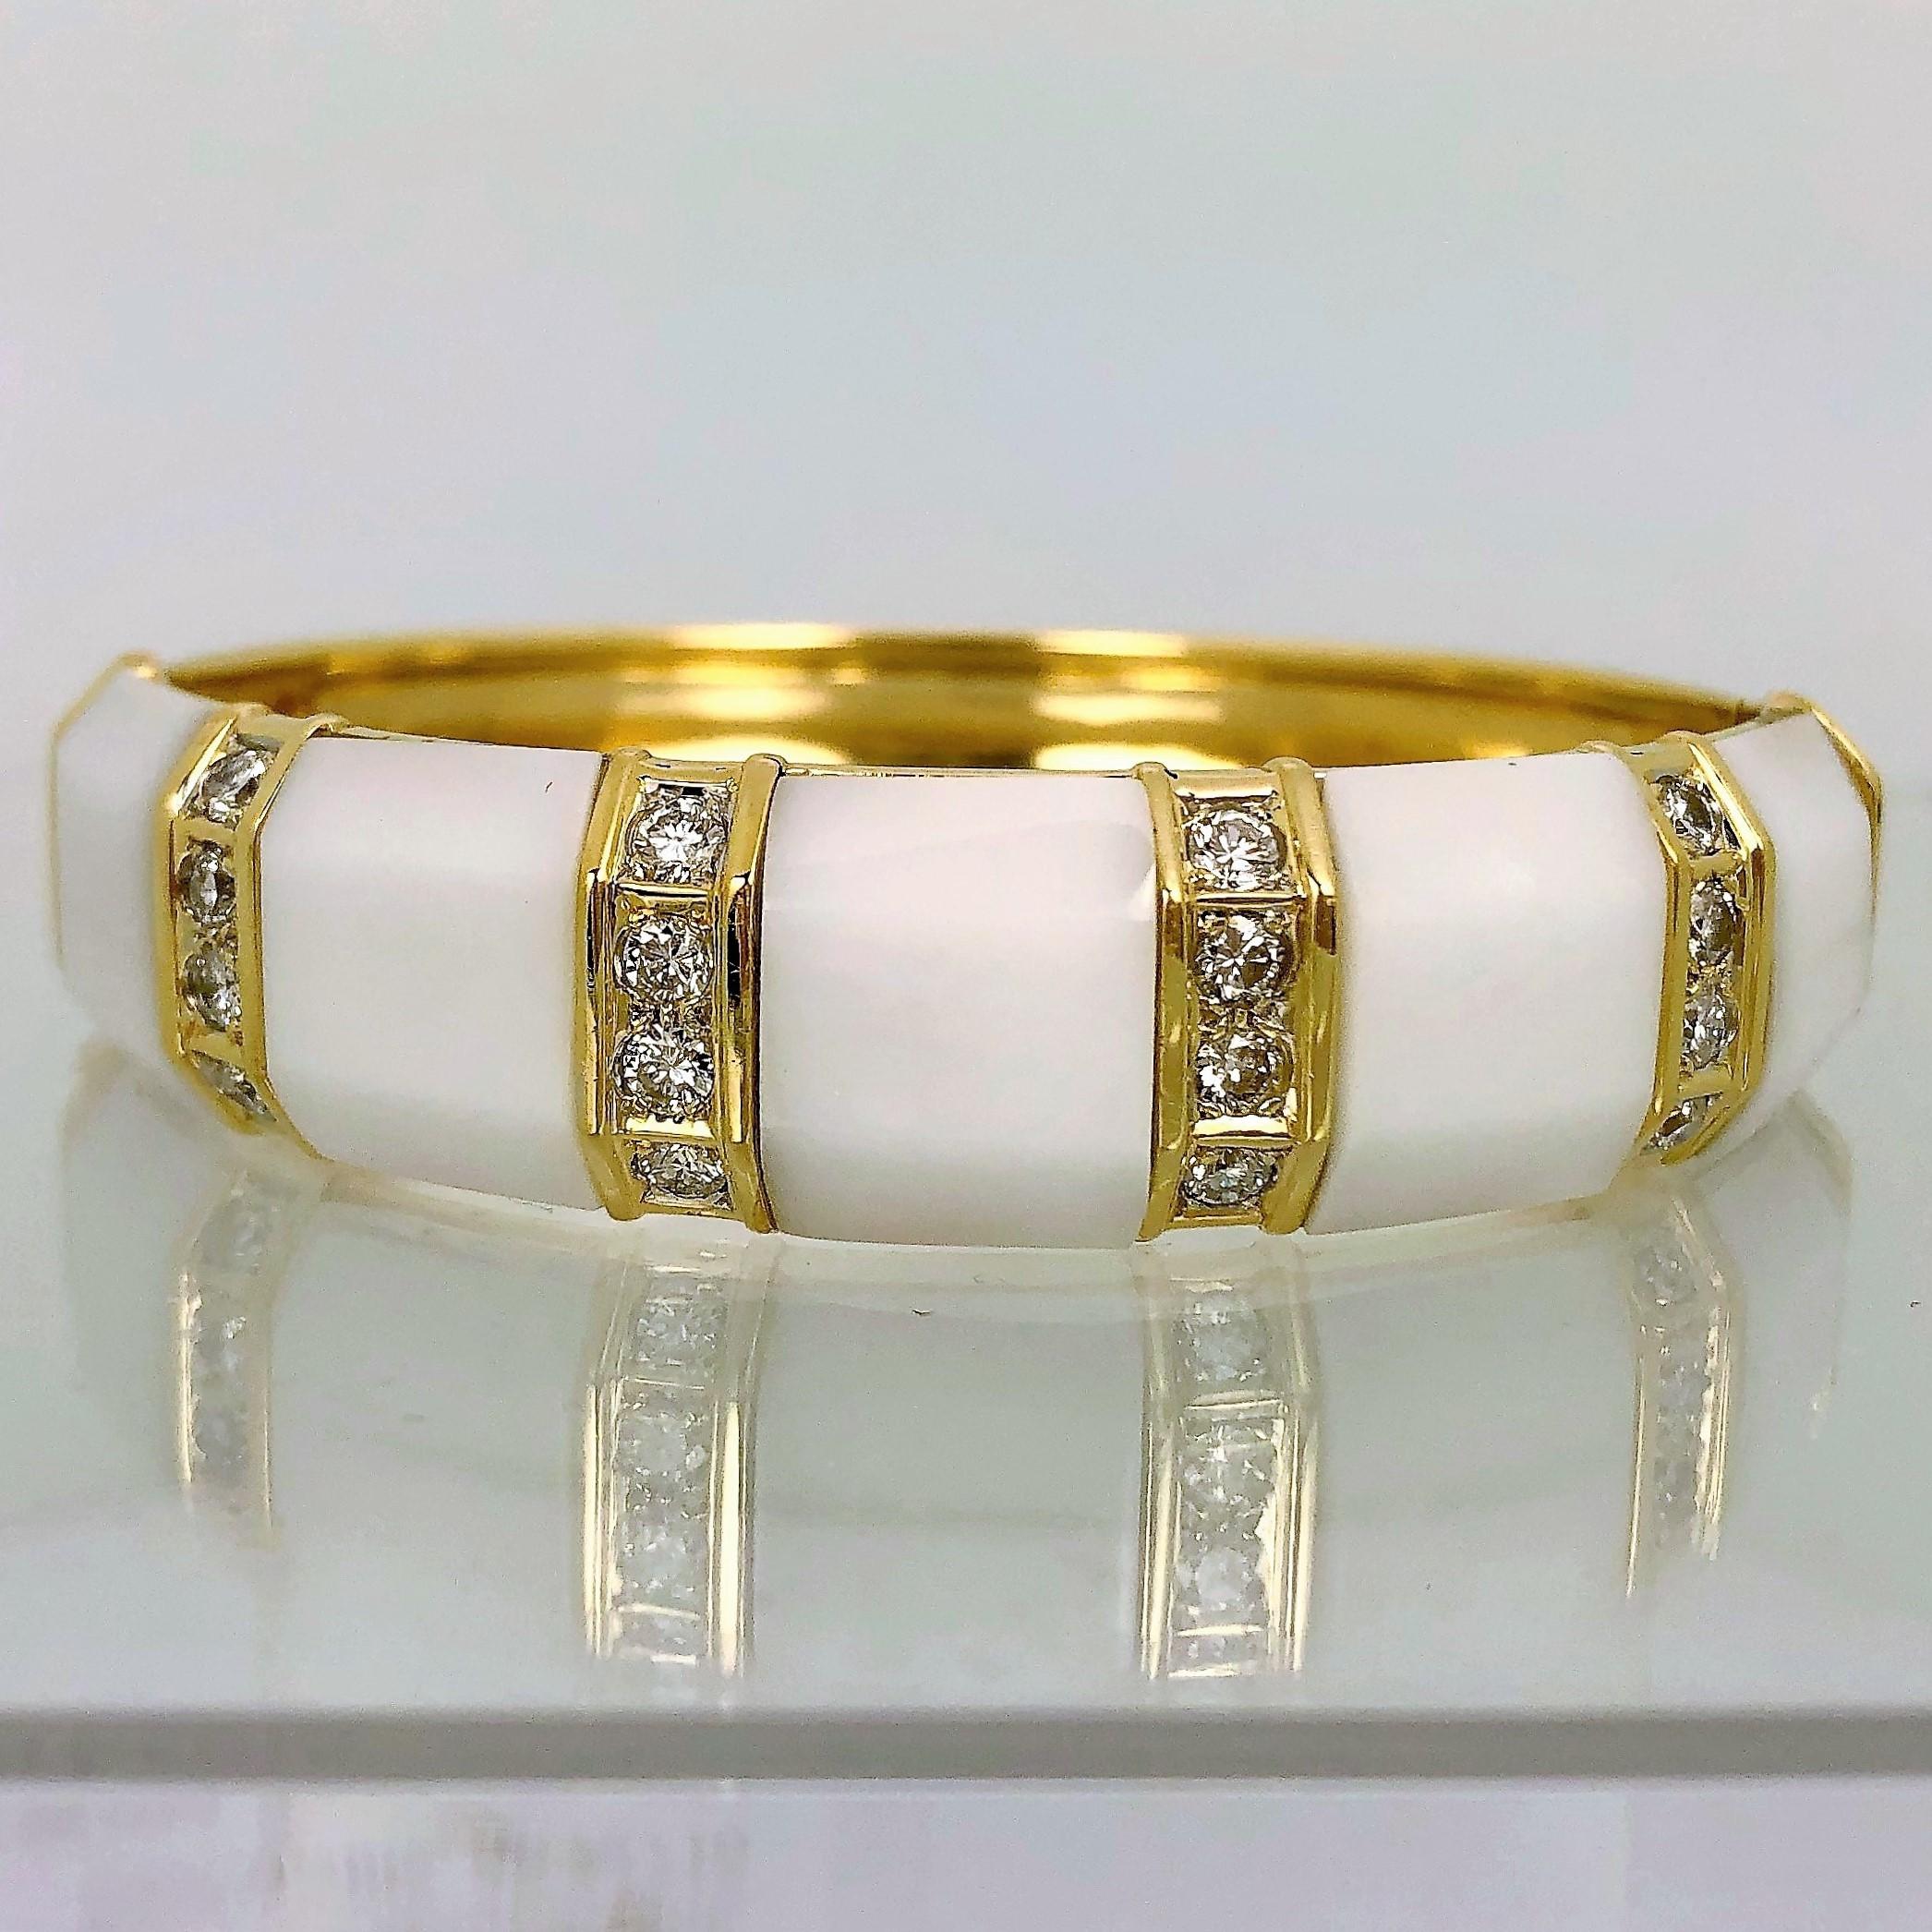 Made of 18K Yellow Gold inset with five custom cut white onyx sections flanked 
by six rows of channel set round brilliant cut diamonds. Each row contains 4 diamonds. The 24 diamonds weigh an approximate total of 1.25CT of overall G Color VS2-SI1